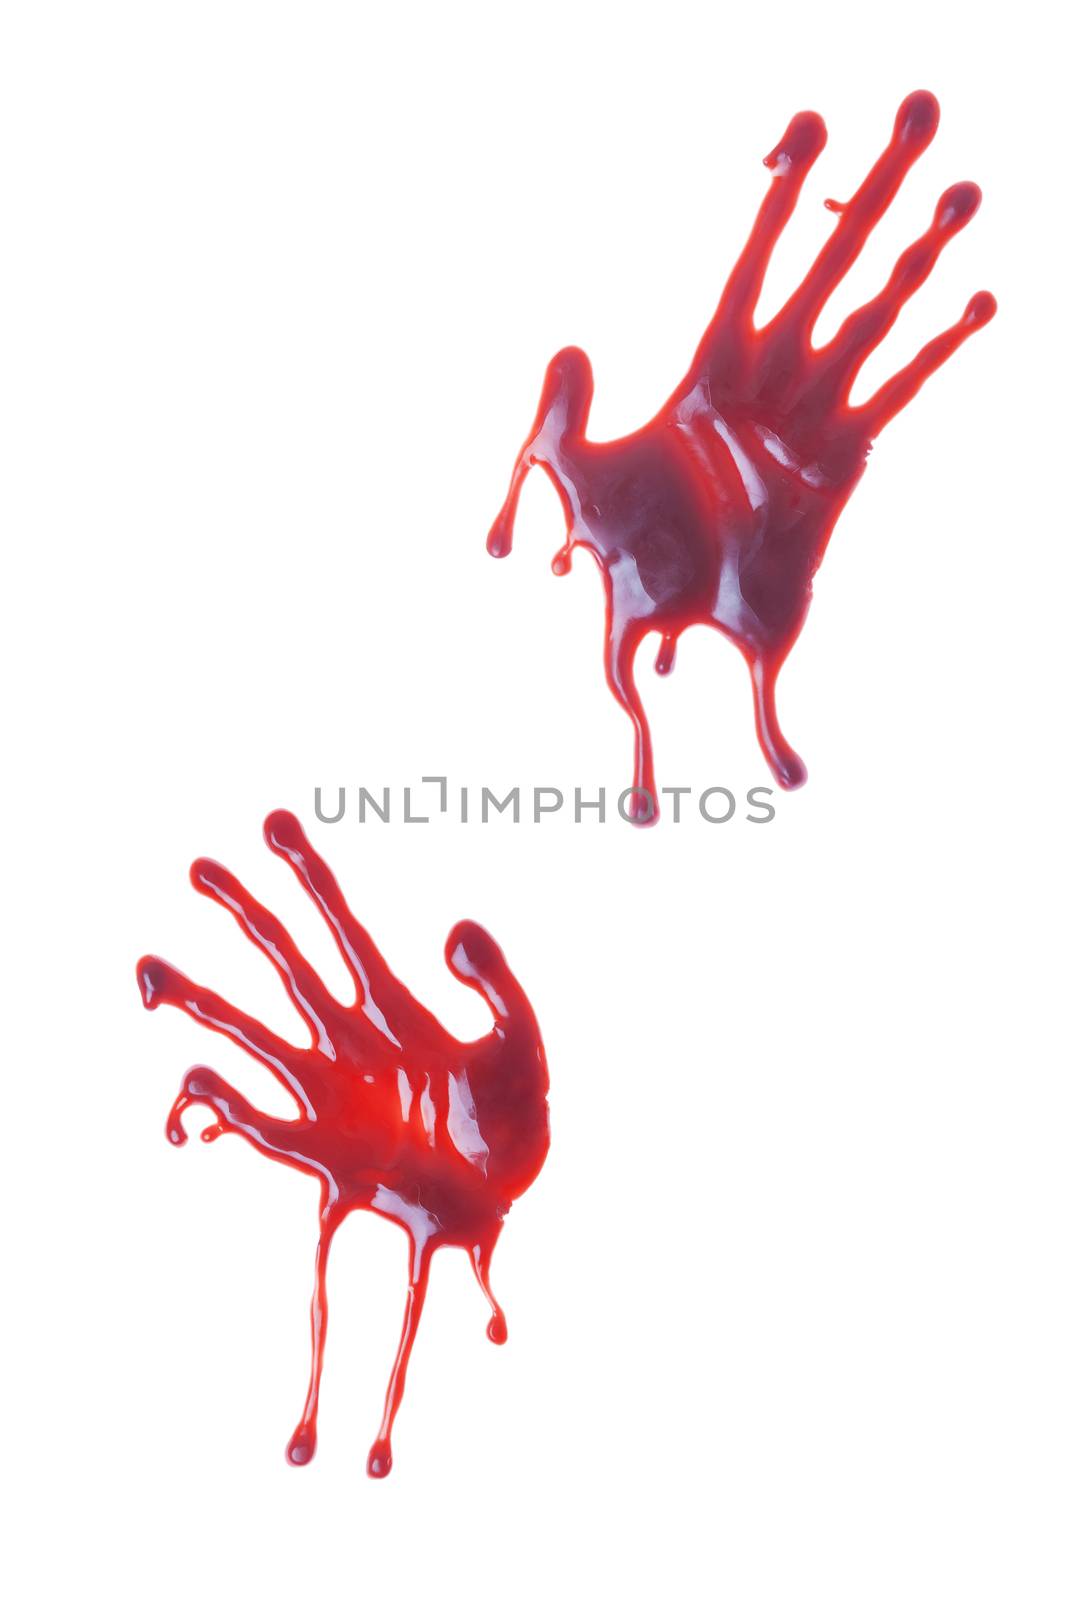 Bloody hand prints on a white background.